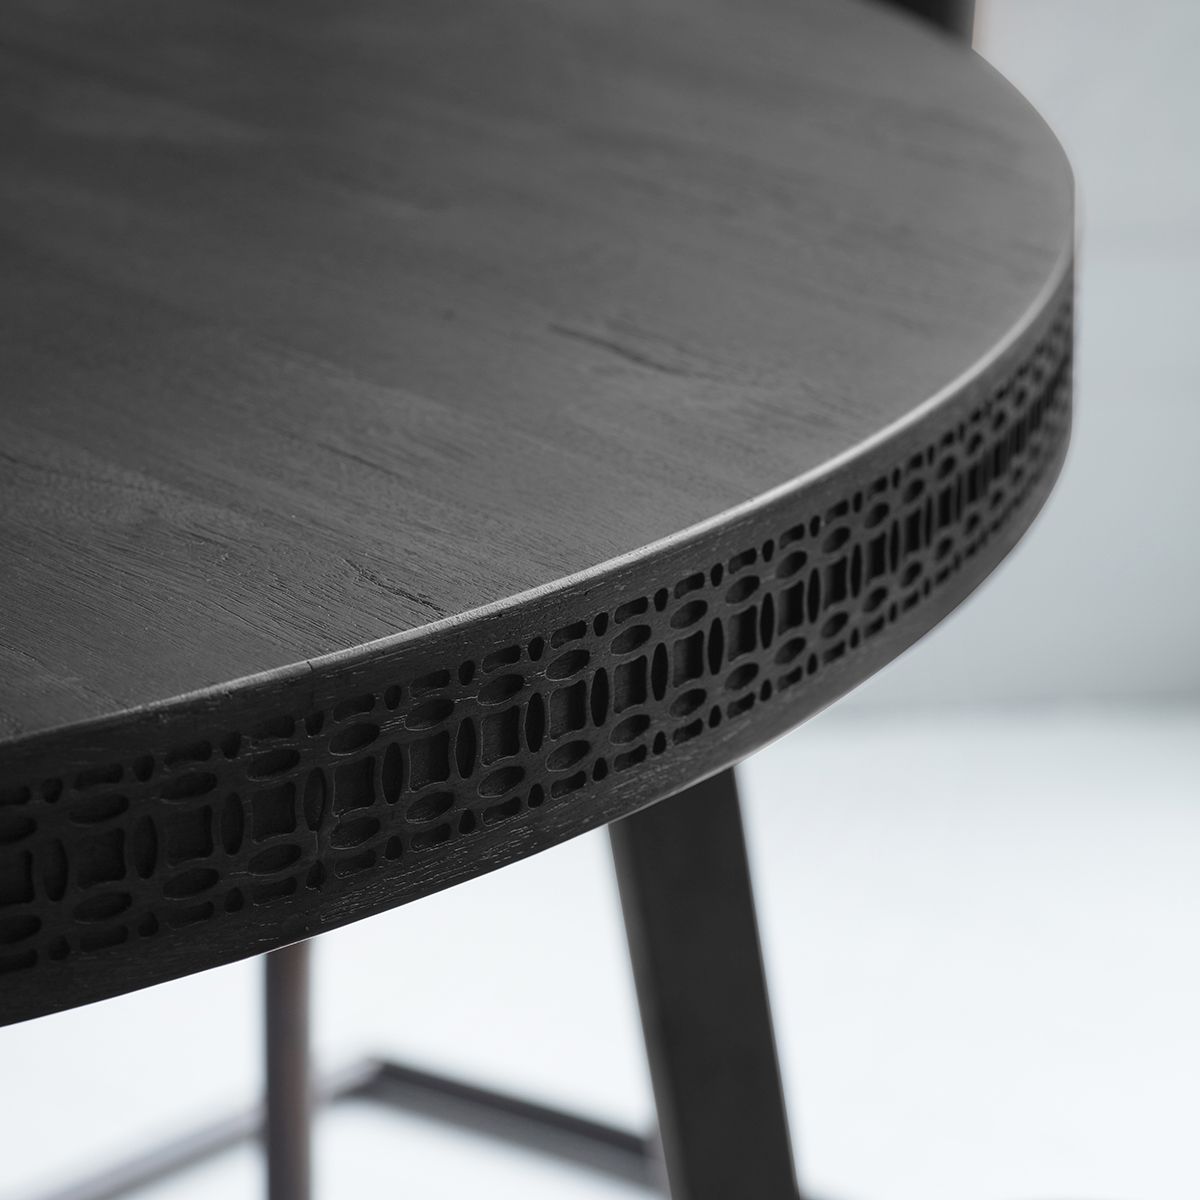 Calvera Boutique Wooden Round Dining Table in Black - Maison Rêves UK